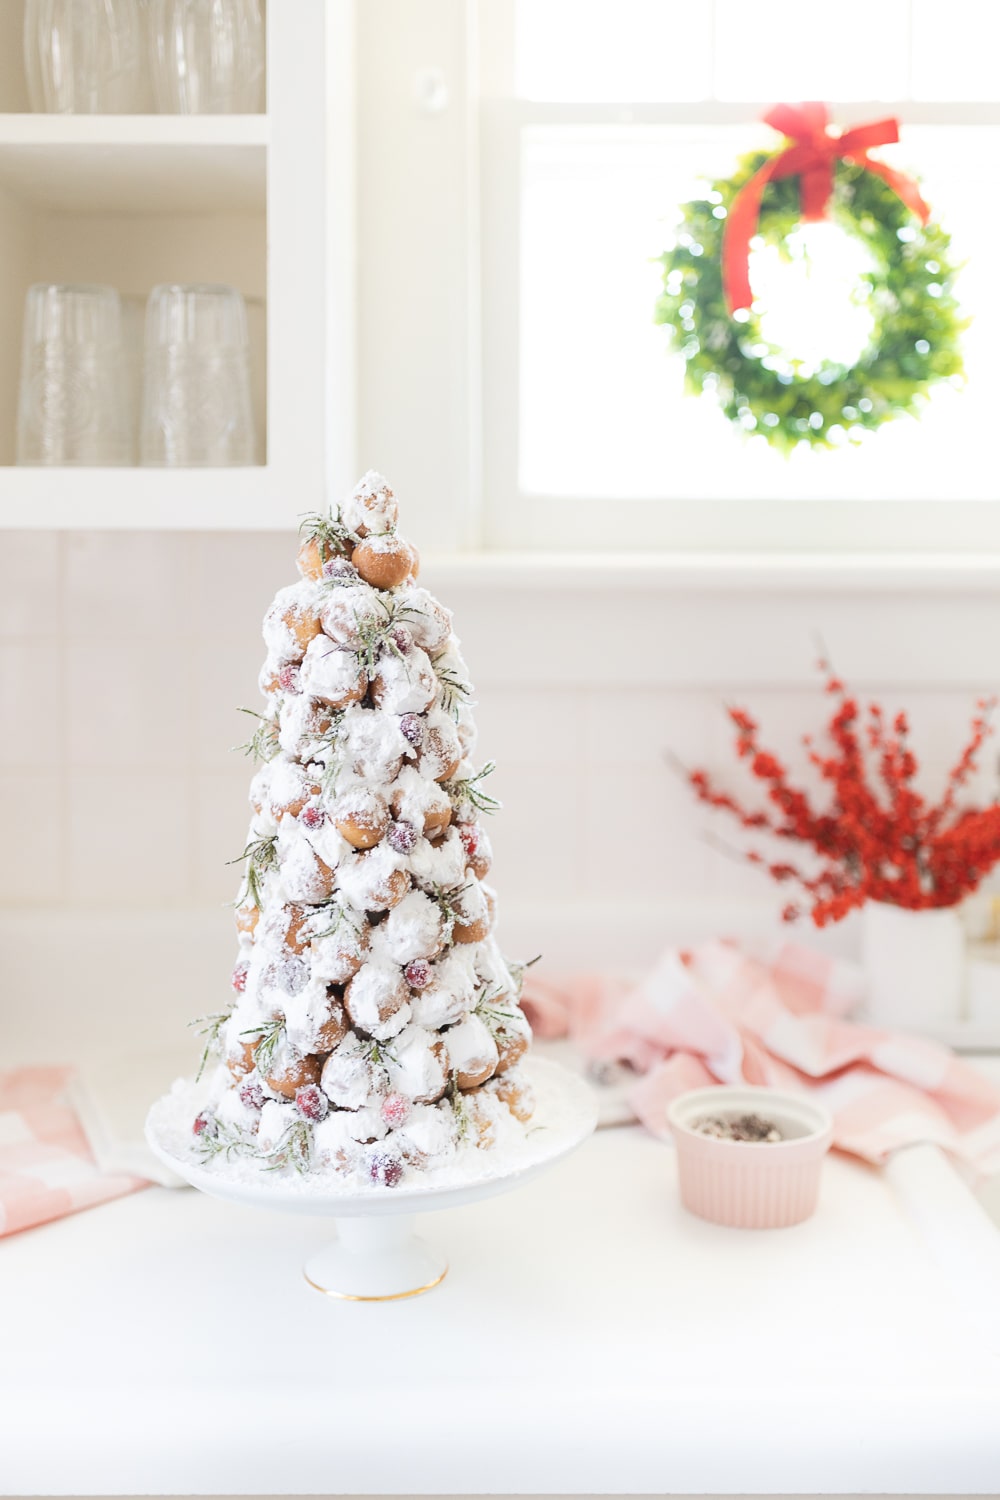 Blogger Stephanie Ziajka shows how to make your own Christmas tree dessert made out of donut holes on Diary of a Debutante